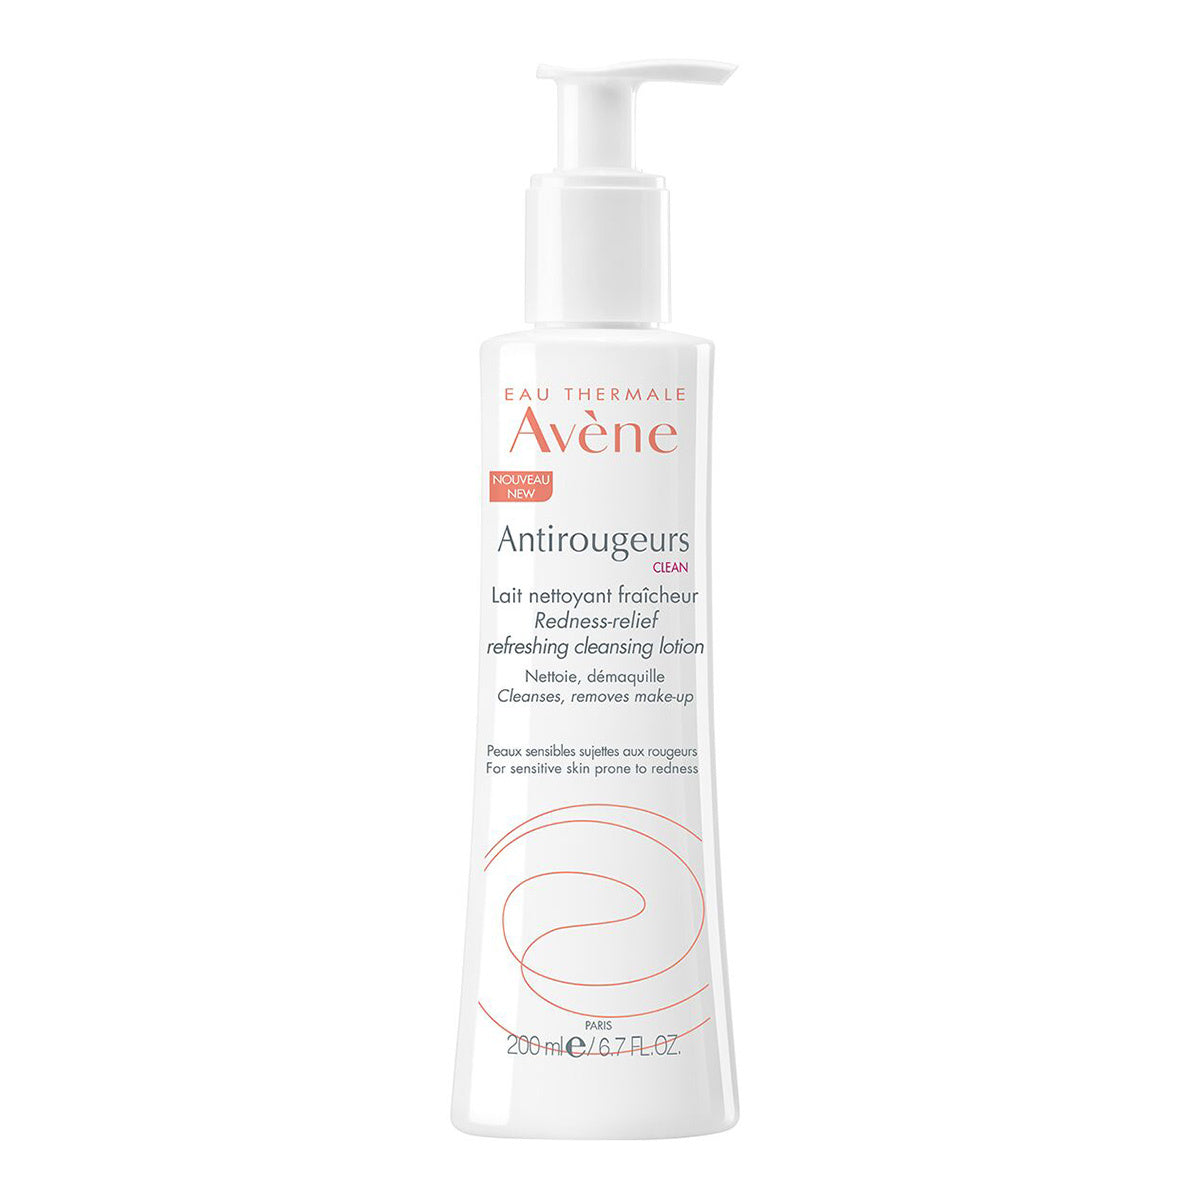 Primary image of Antirougeurs Refreshing Cleansing Lotion